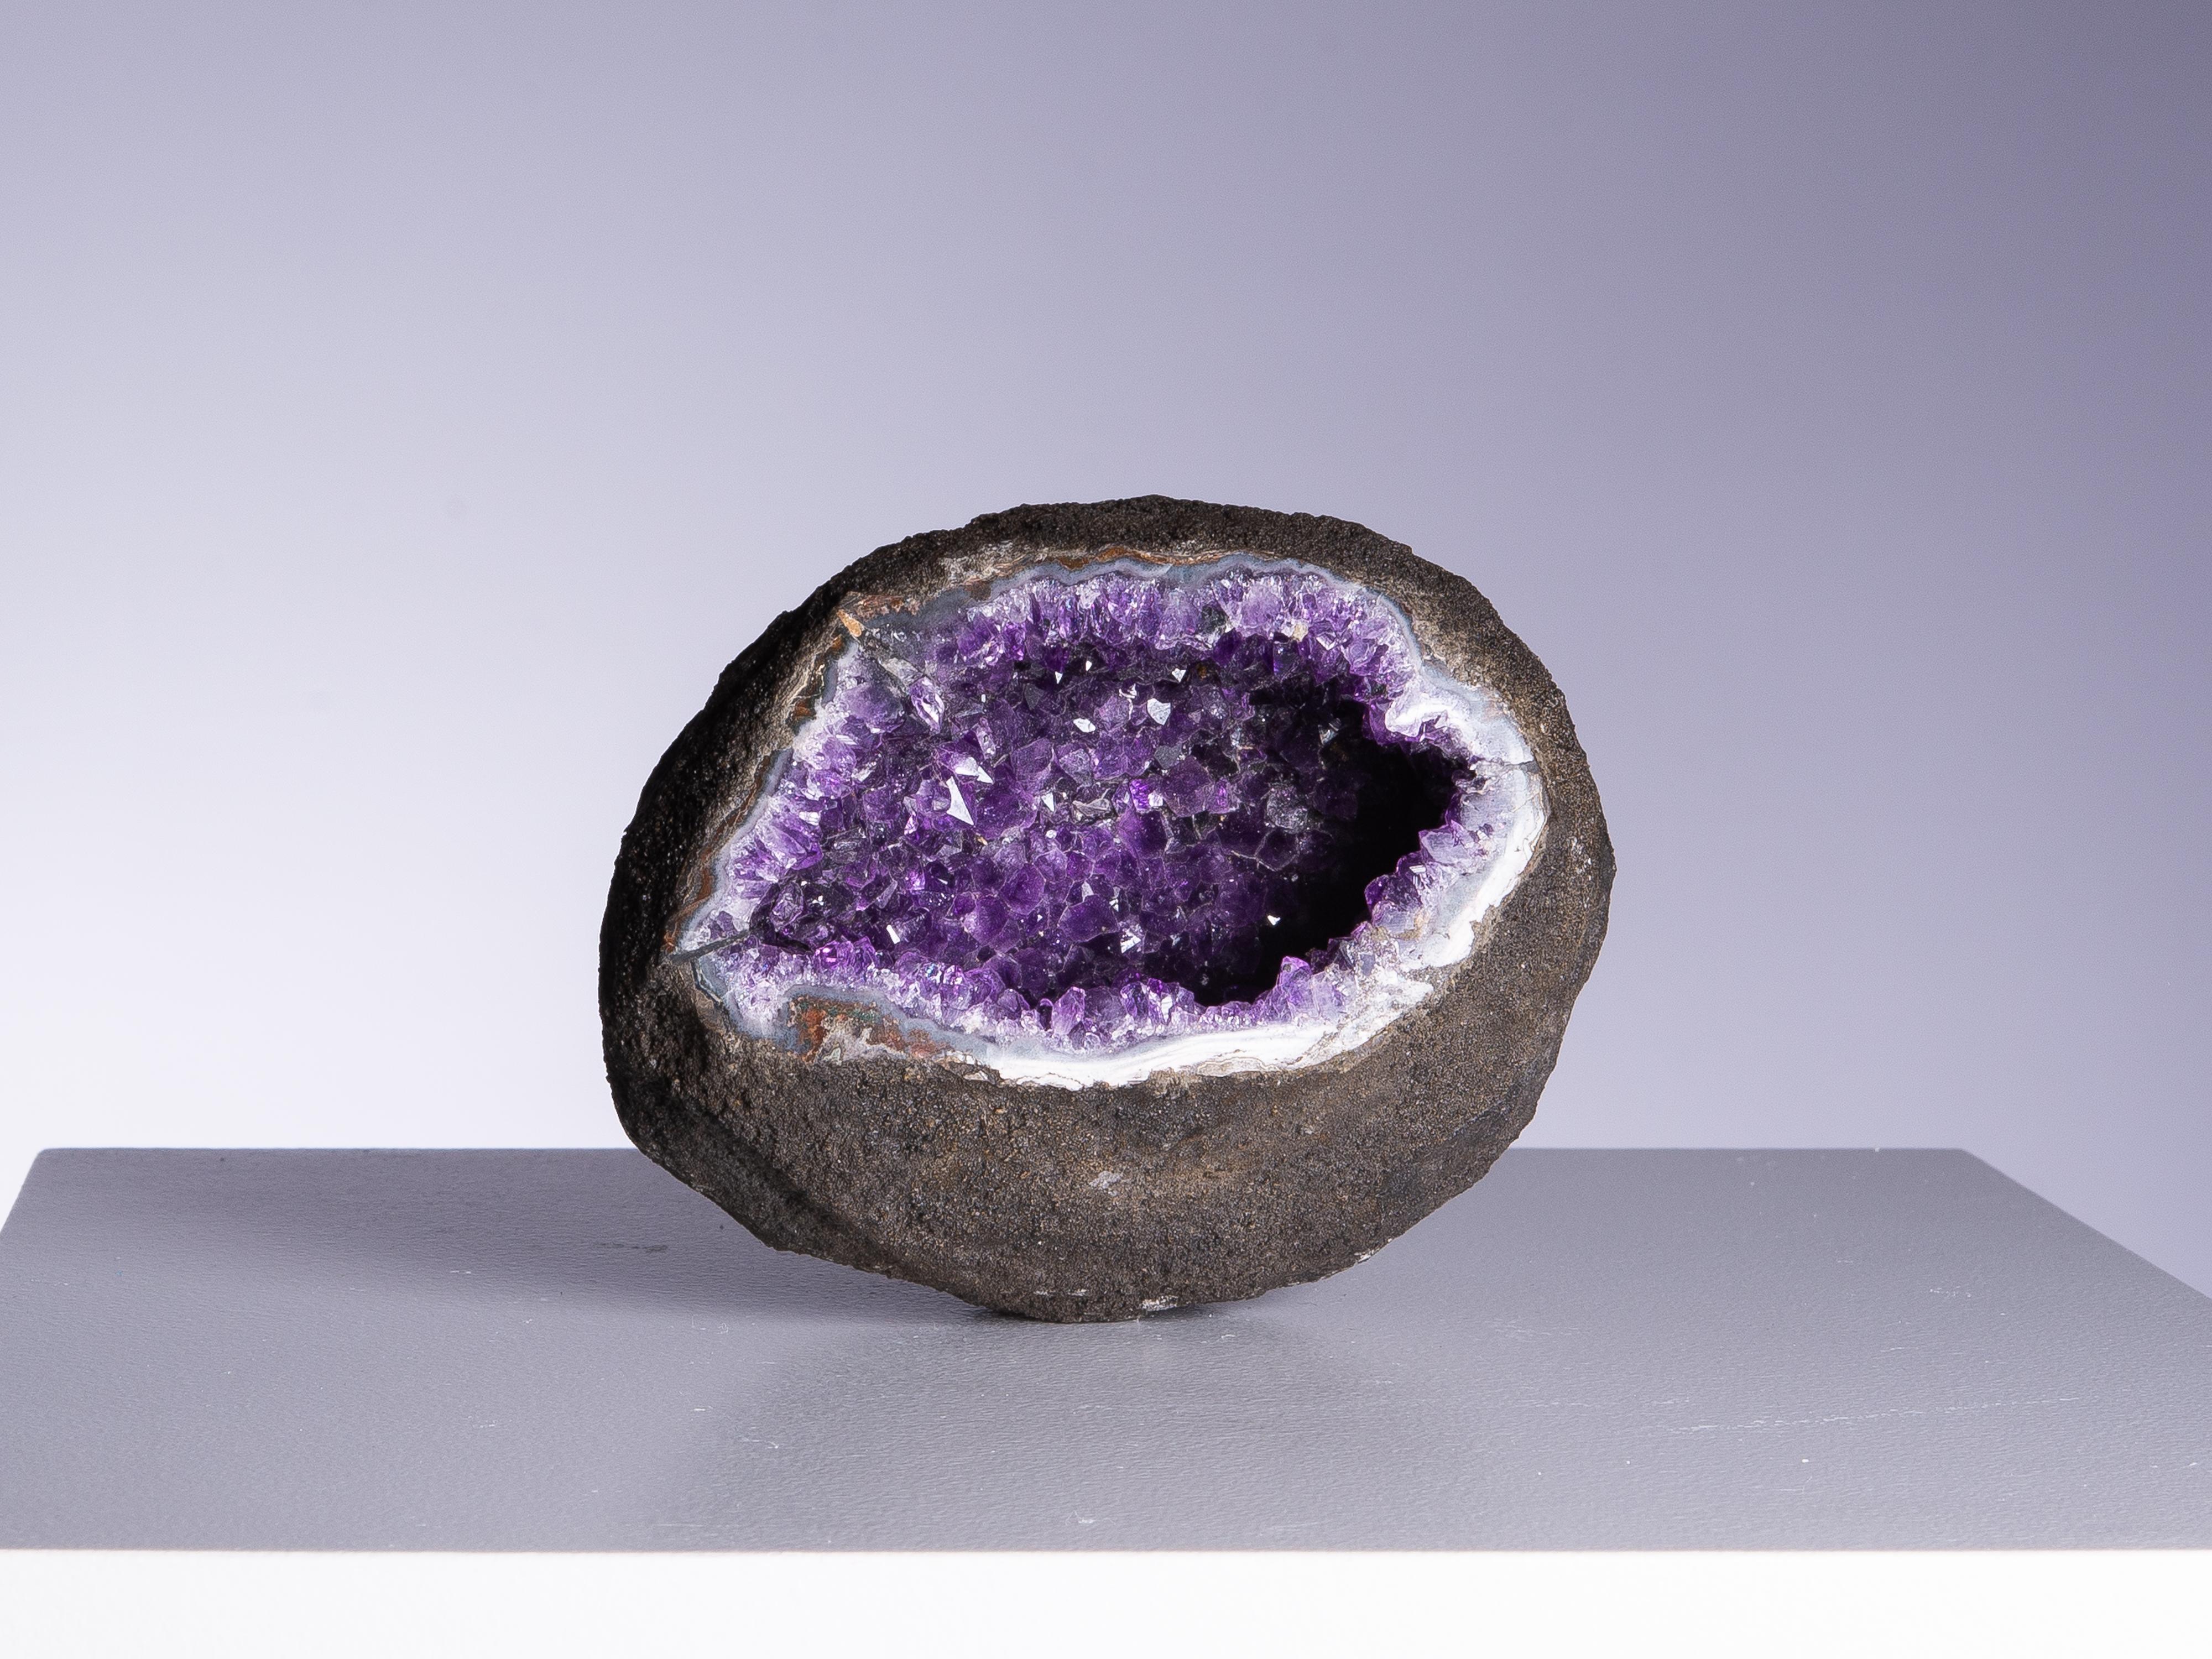 A gorgeous small oval amethyst geode with an eye-shaped aesthetic
opening revealing the high quality amethyst interior, creating a wonderful
contrast with the rough basalt exterior. The edges polished to reveal the
white quartz and blue agate